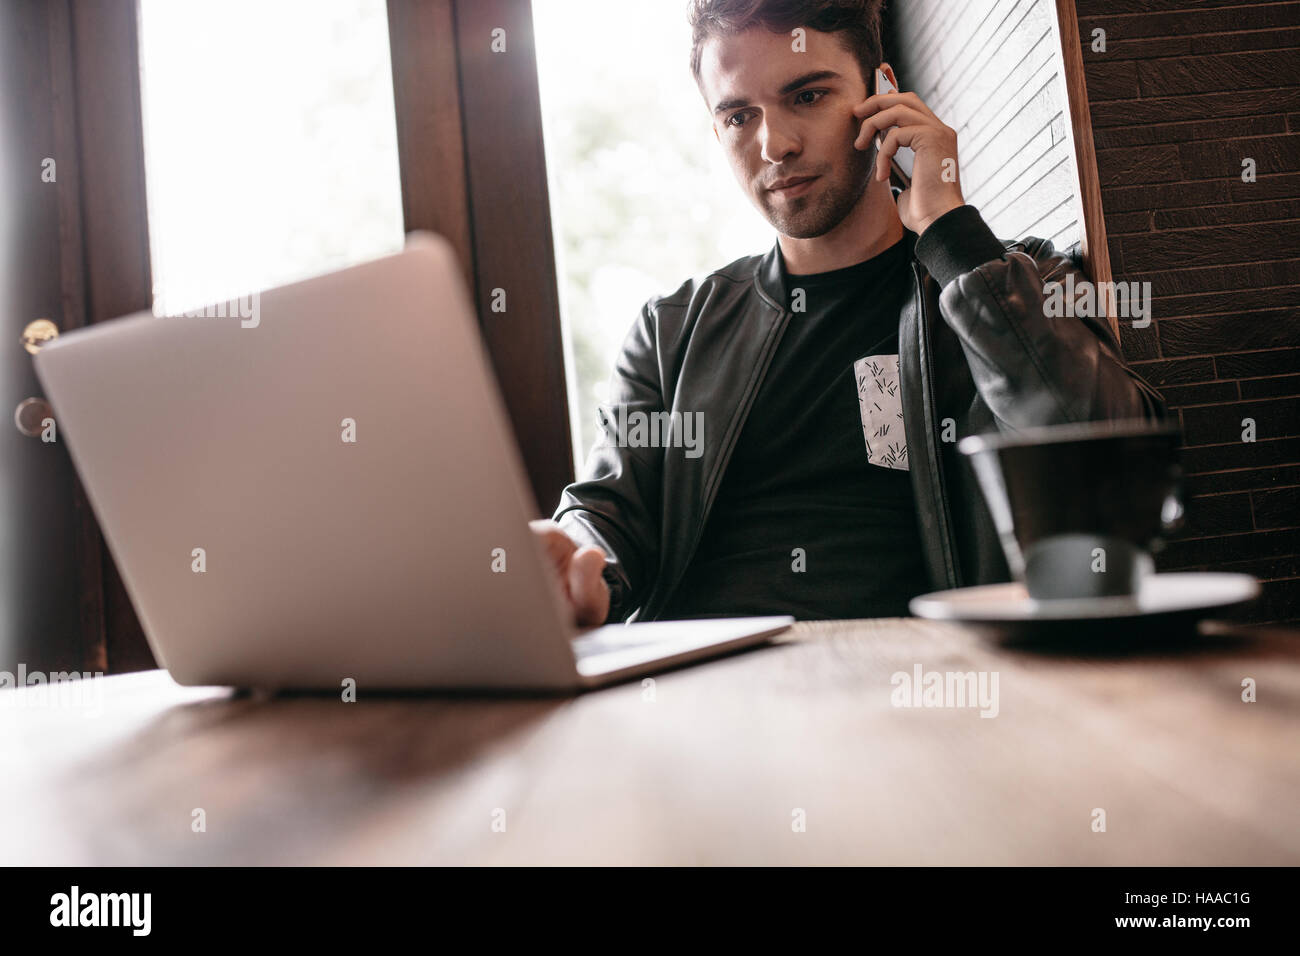 Handsome man sitting in cafe table with cup of coffee using mobile phone and laptop. Stock Photo